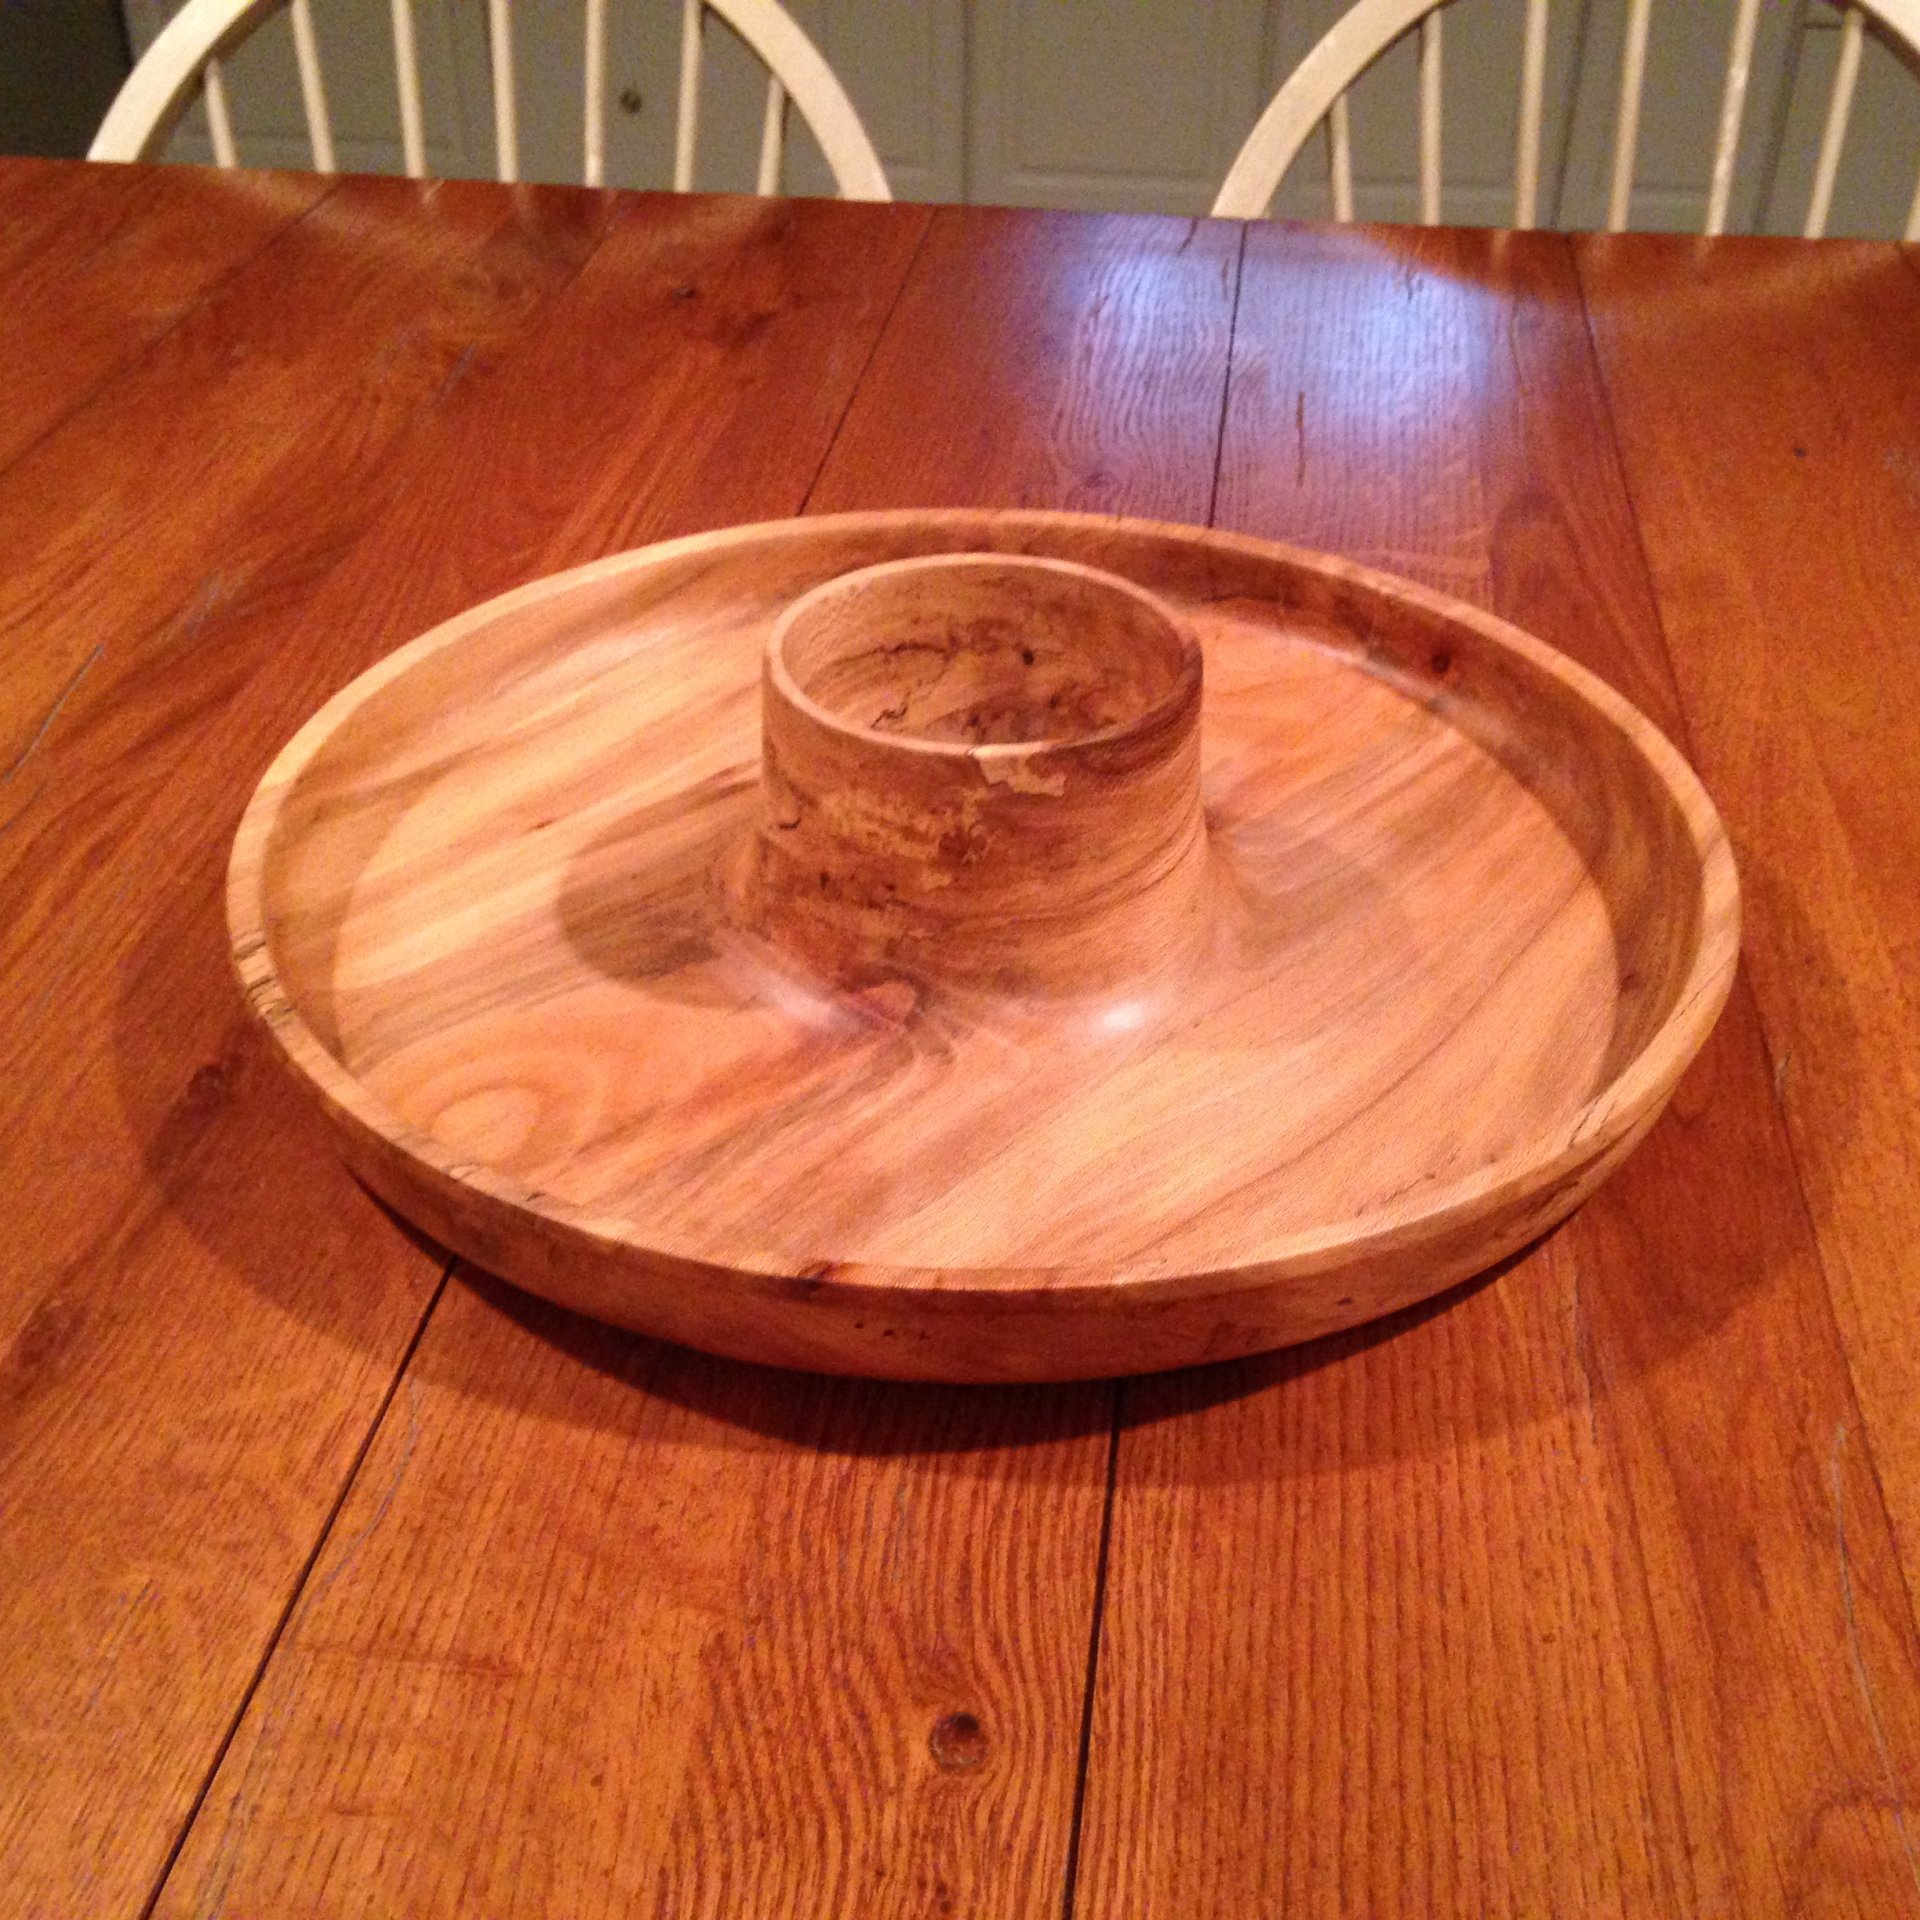 15" chip and dip platter.